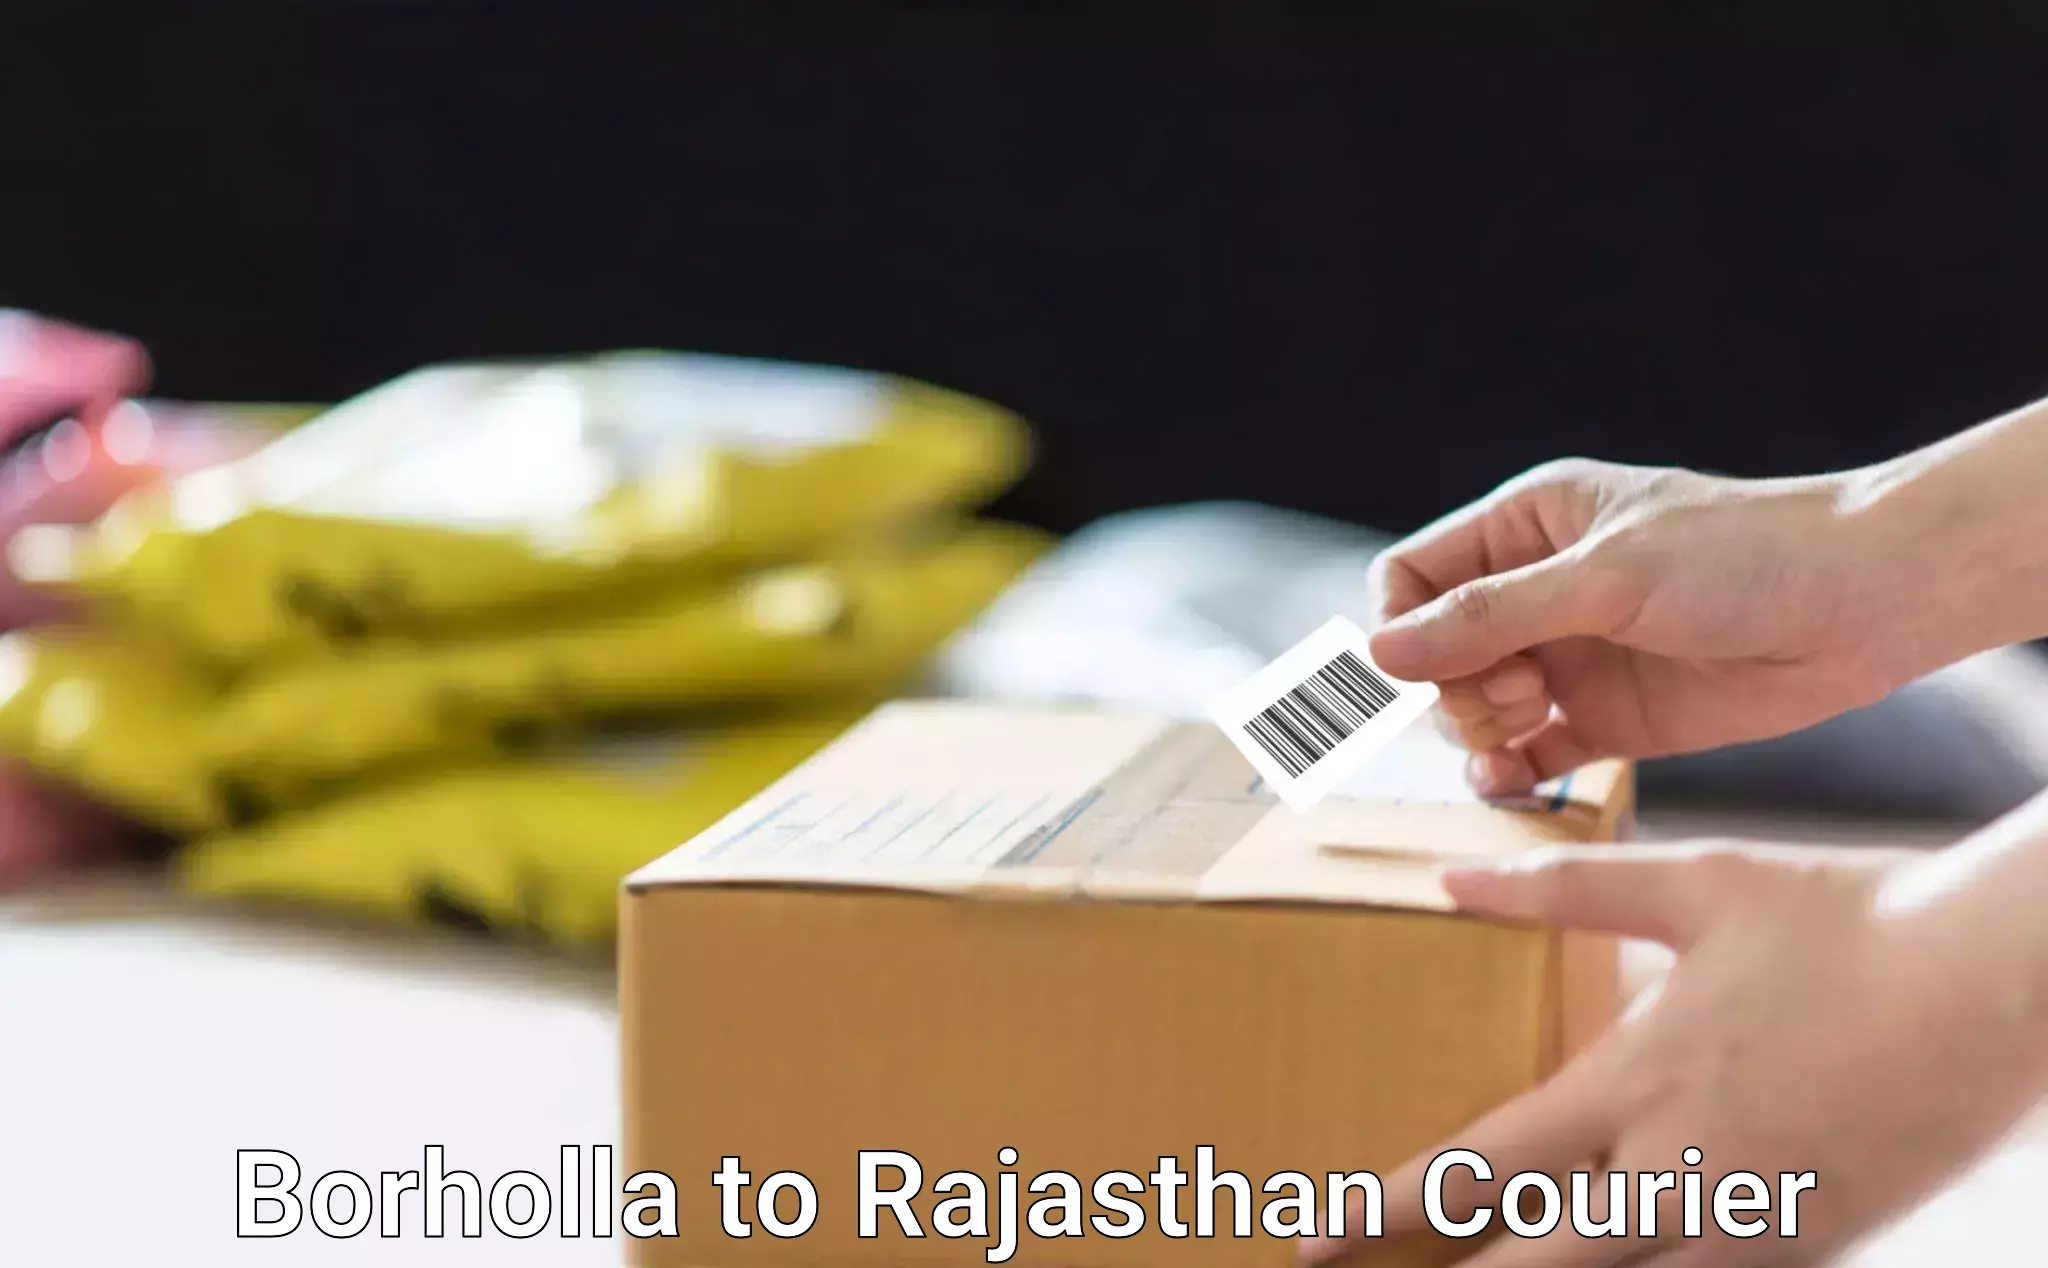 Parcel handling and care Borholla to Rajasthan